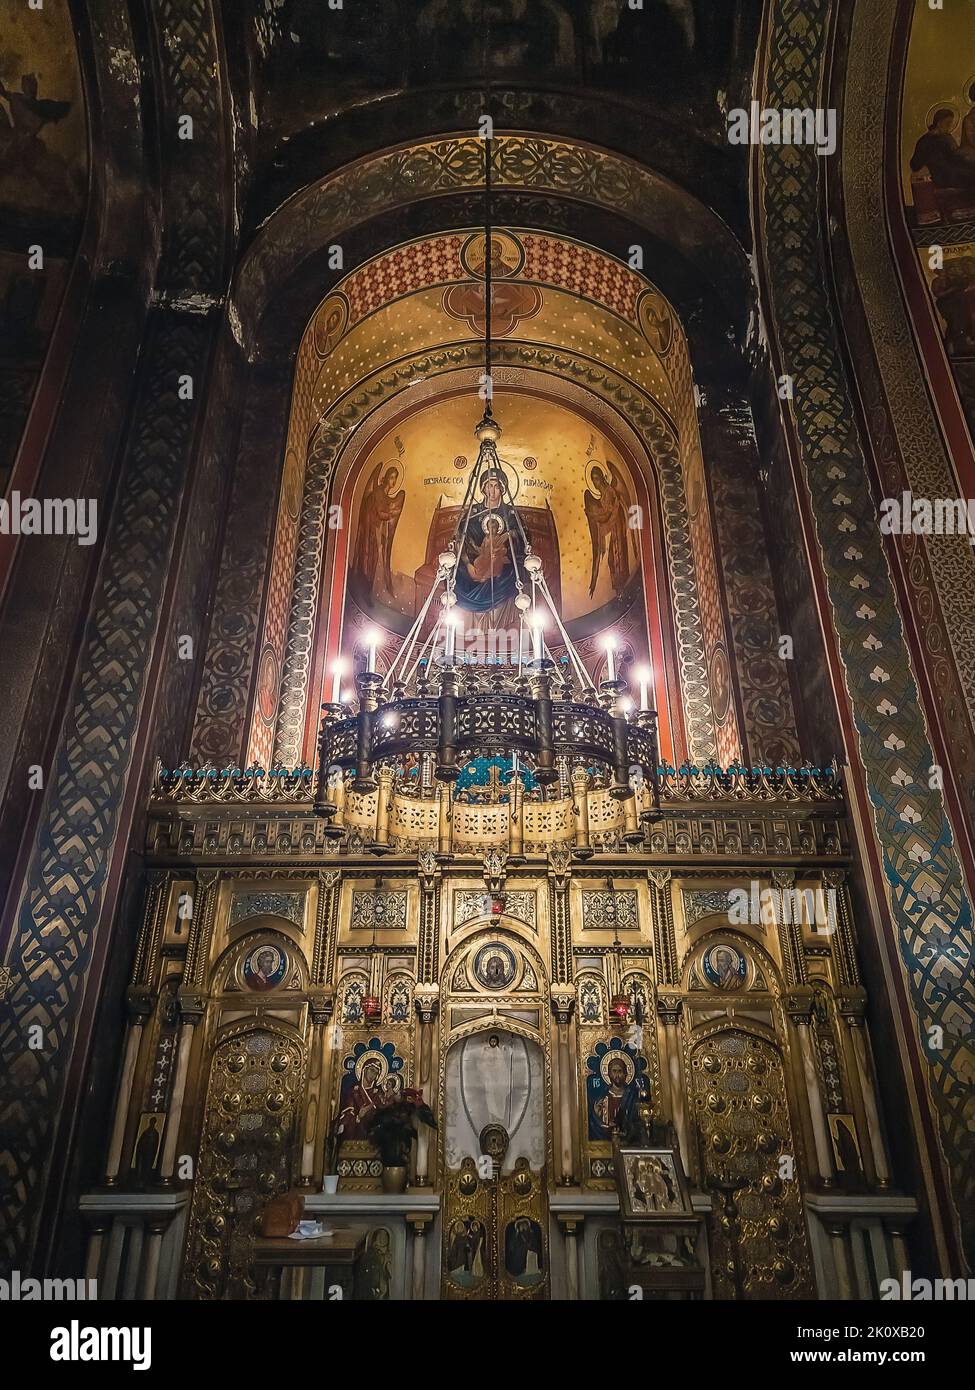 Interior details of Curtea de Arges monastery. The altar and ornate walls with painted icons and a golden chandelier with lights suspending out of cei Stock Photo